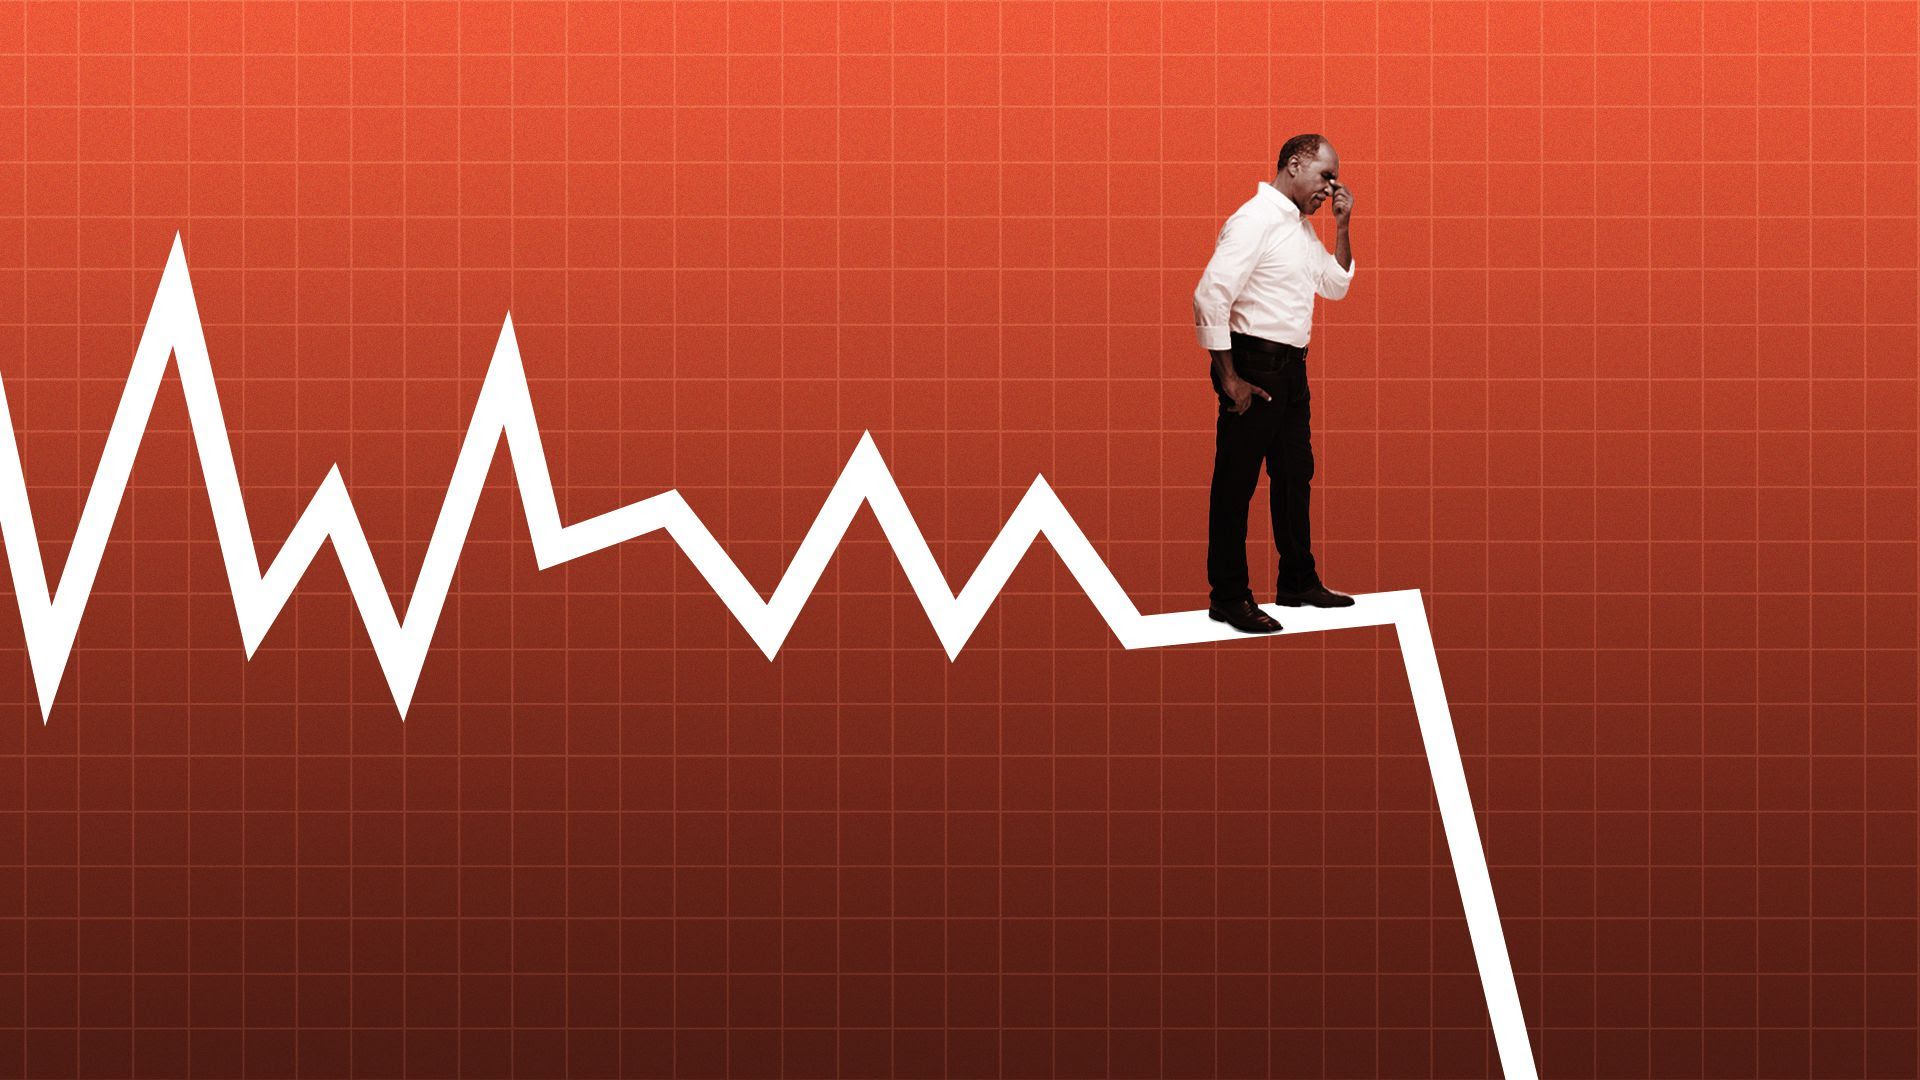 Illustration showing a declining graph with a person standing on top of the line with their hand on their forehead.